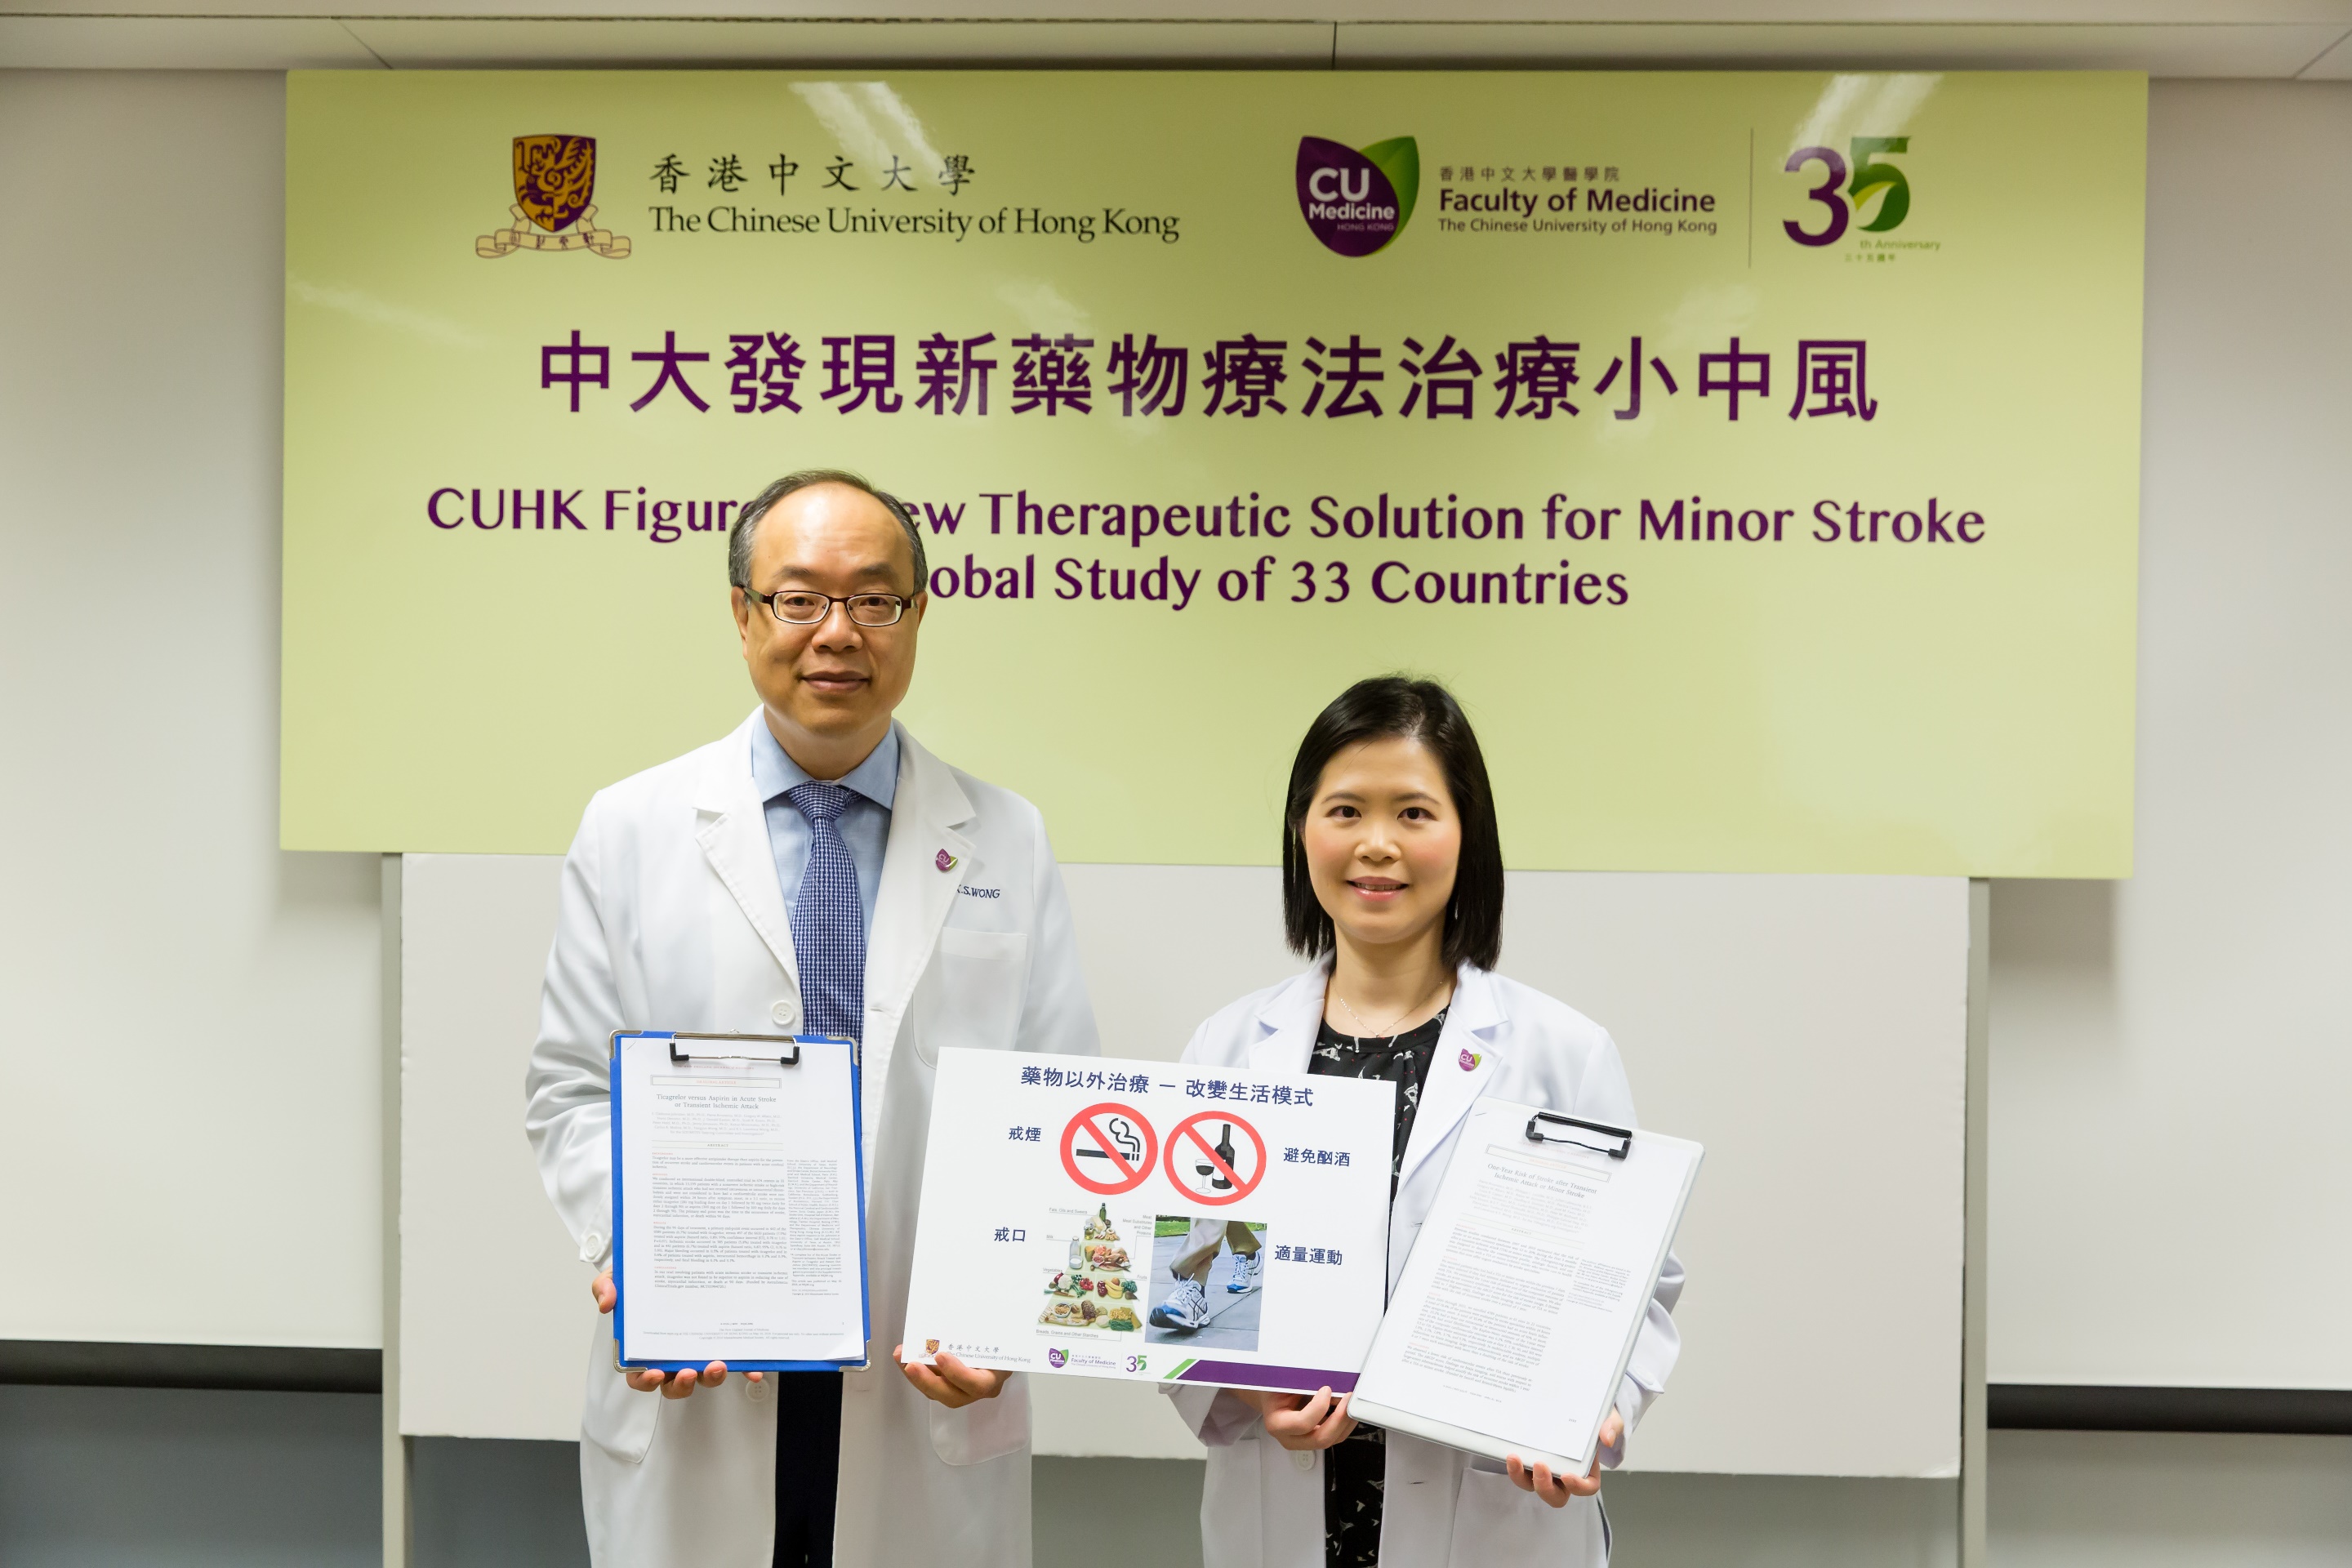 A global study jointly led by CUHK with other neurology centres